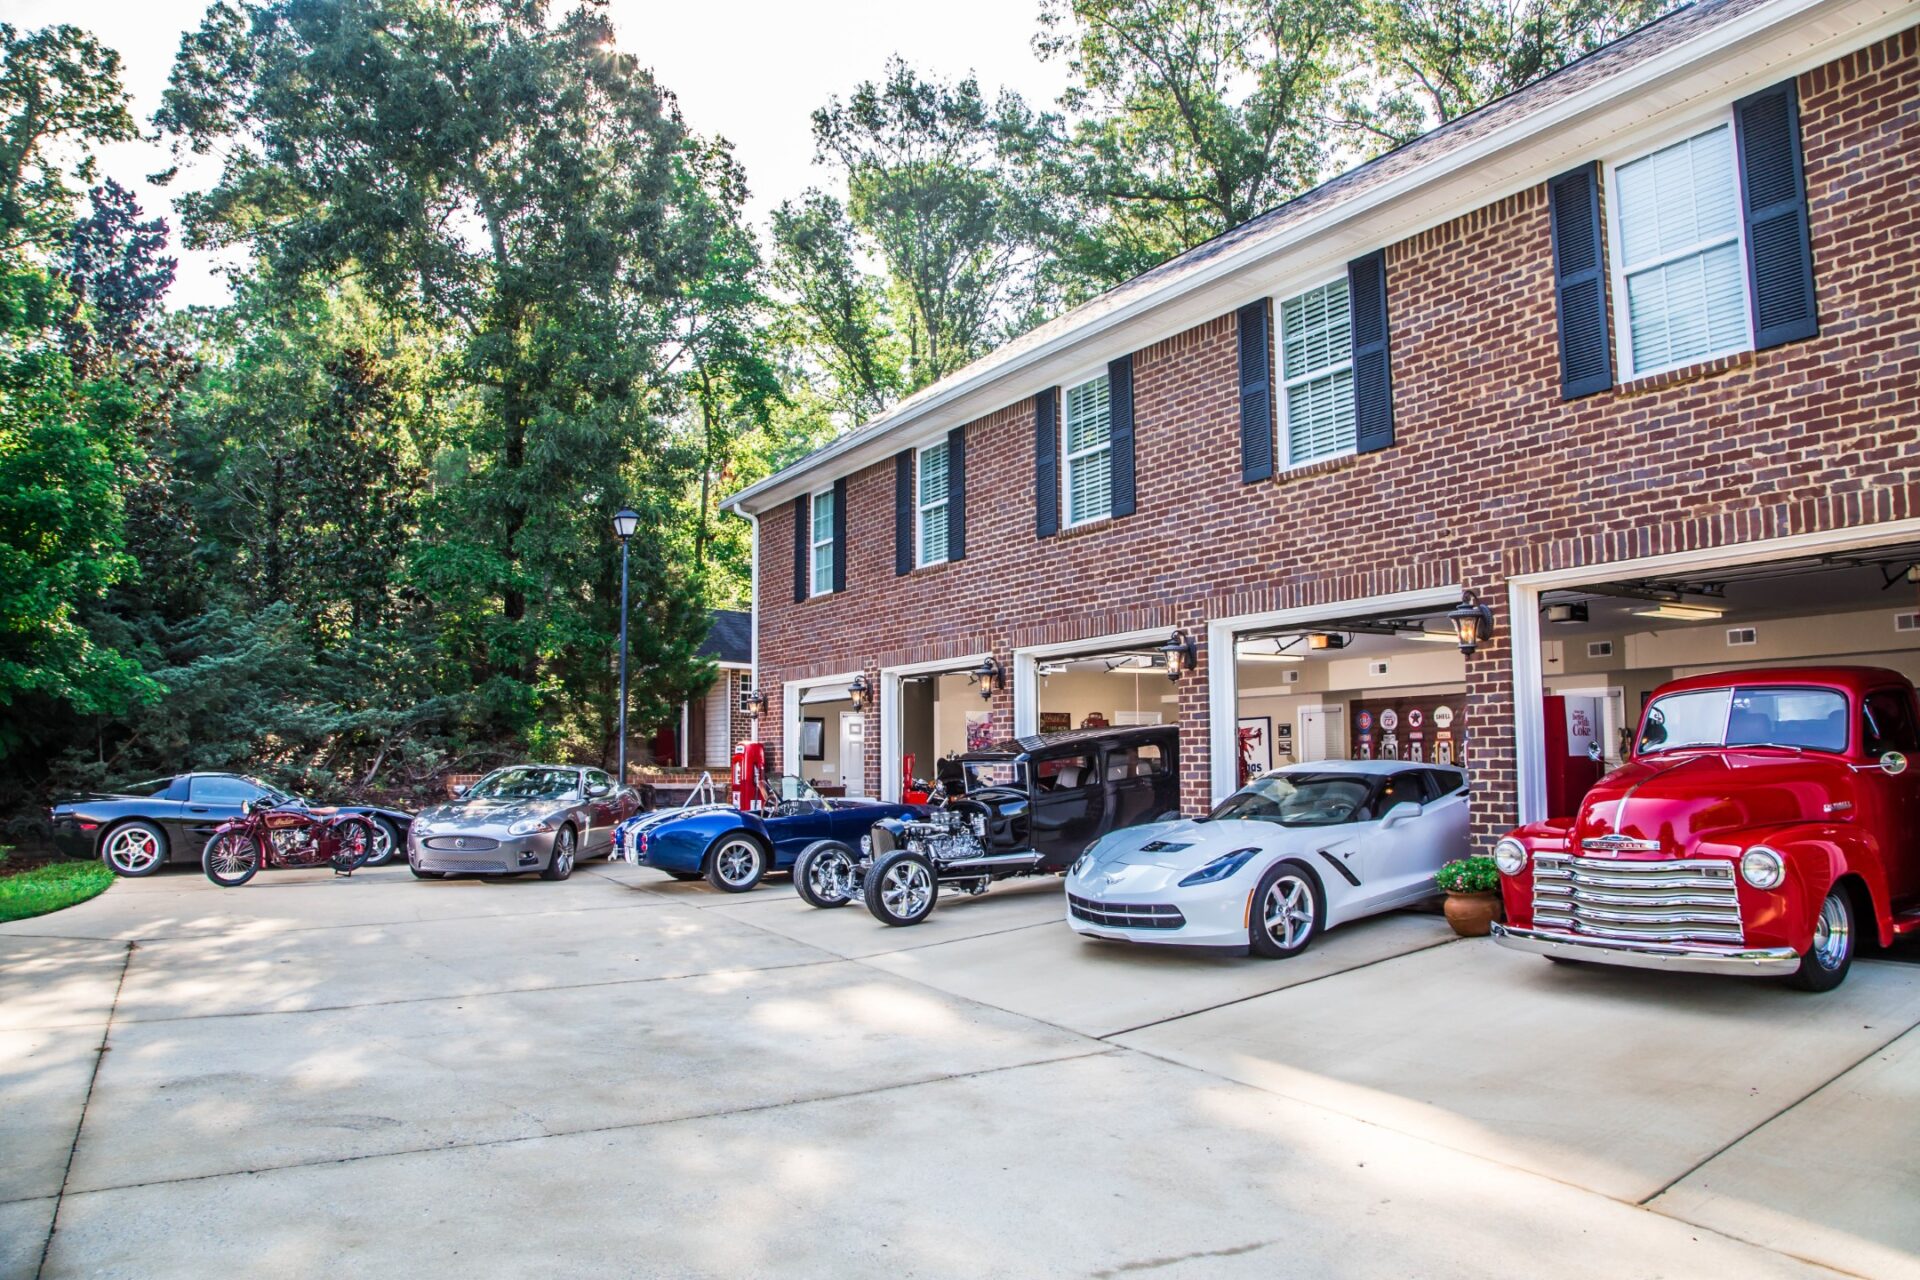 Alabama Getaway: A fashion executive finds solace in a well-sorted garage